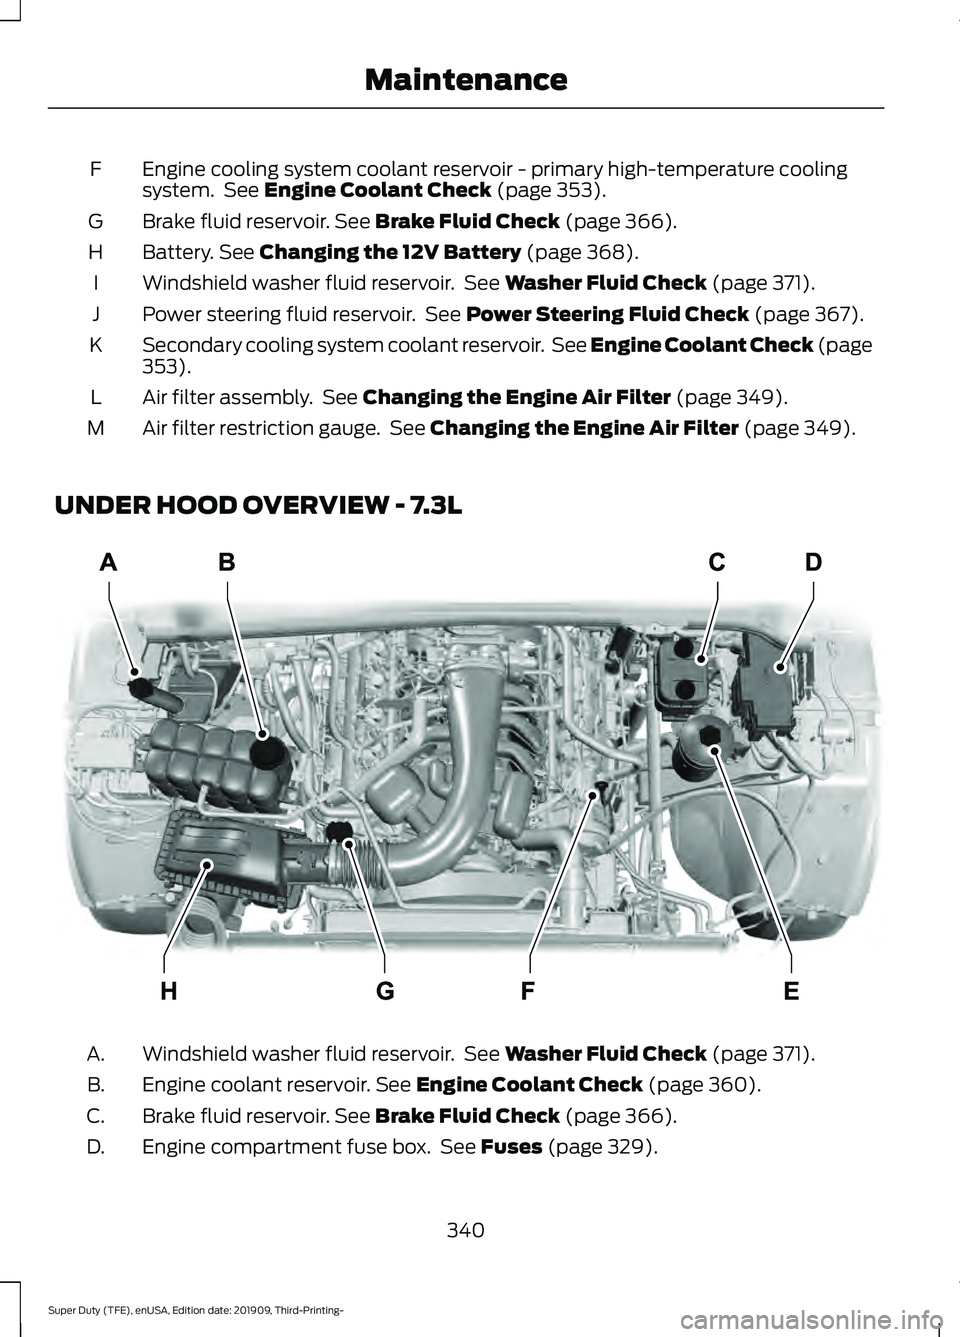 FORD F-550 2020  Owners Manual Engine cooling system coolant reservoir - primary high-temperature cooling
system.  See Engine Coolant Check (page 353).
F
Brake fluid reservoir.
 See Brake Fluid Check (page 366).
G
Battery.
 See Cha